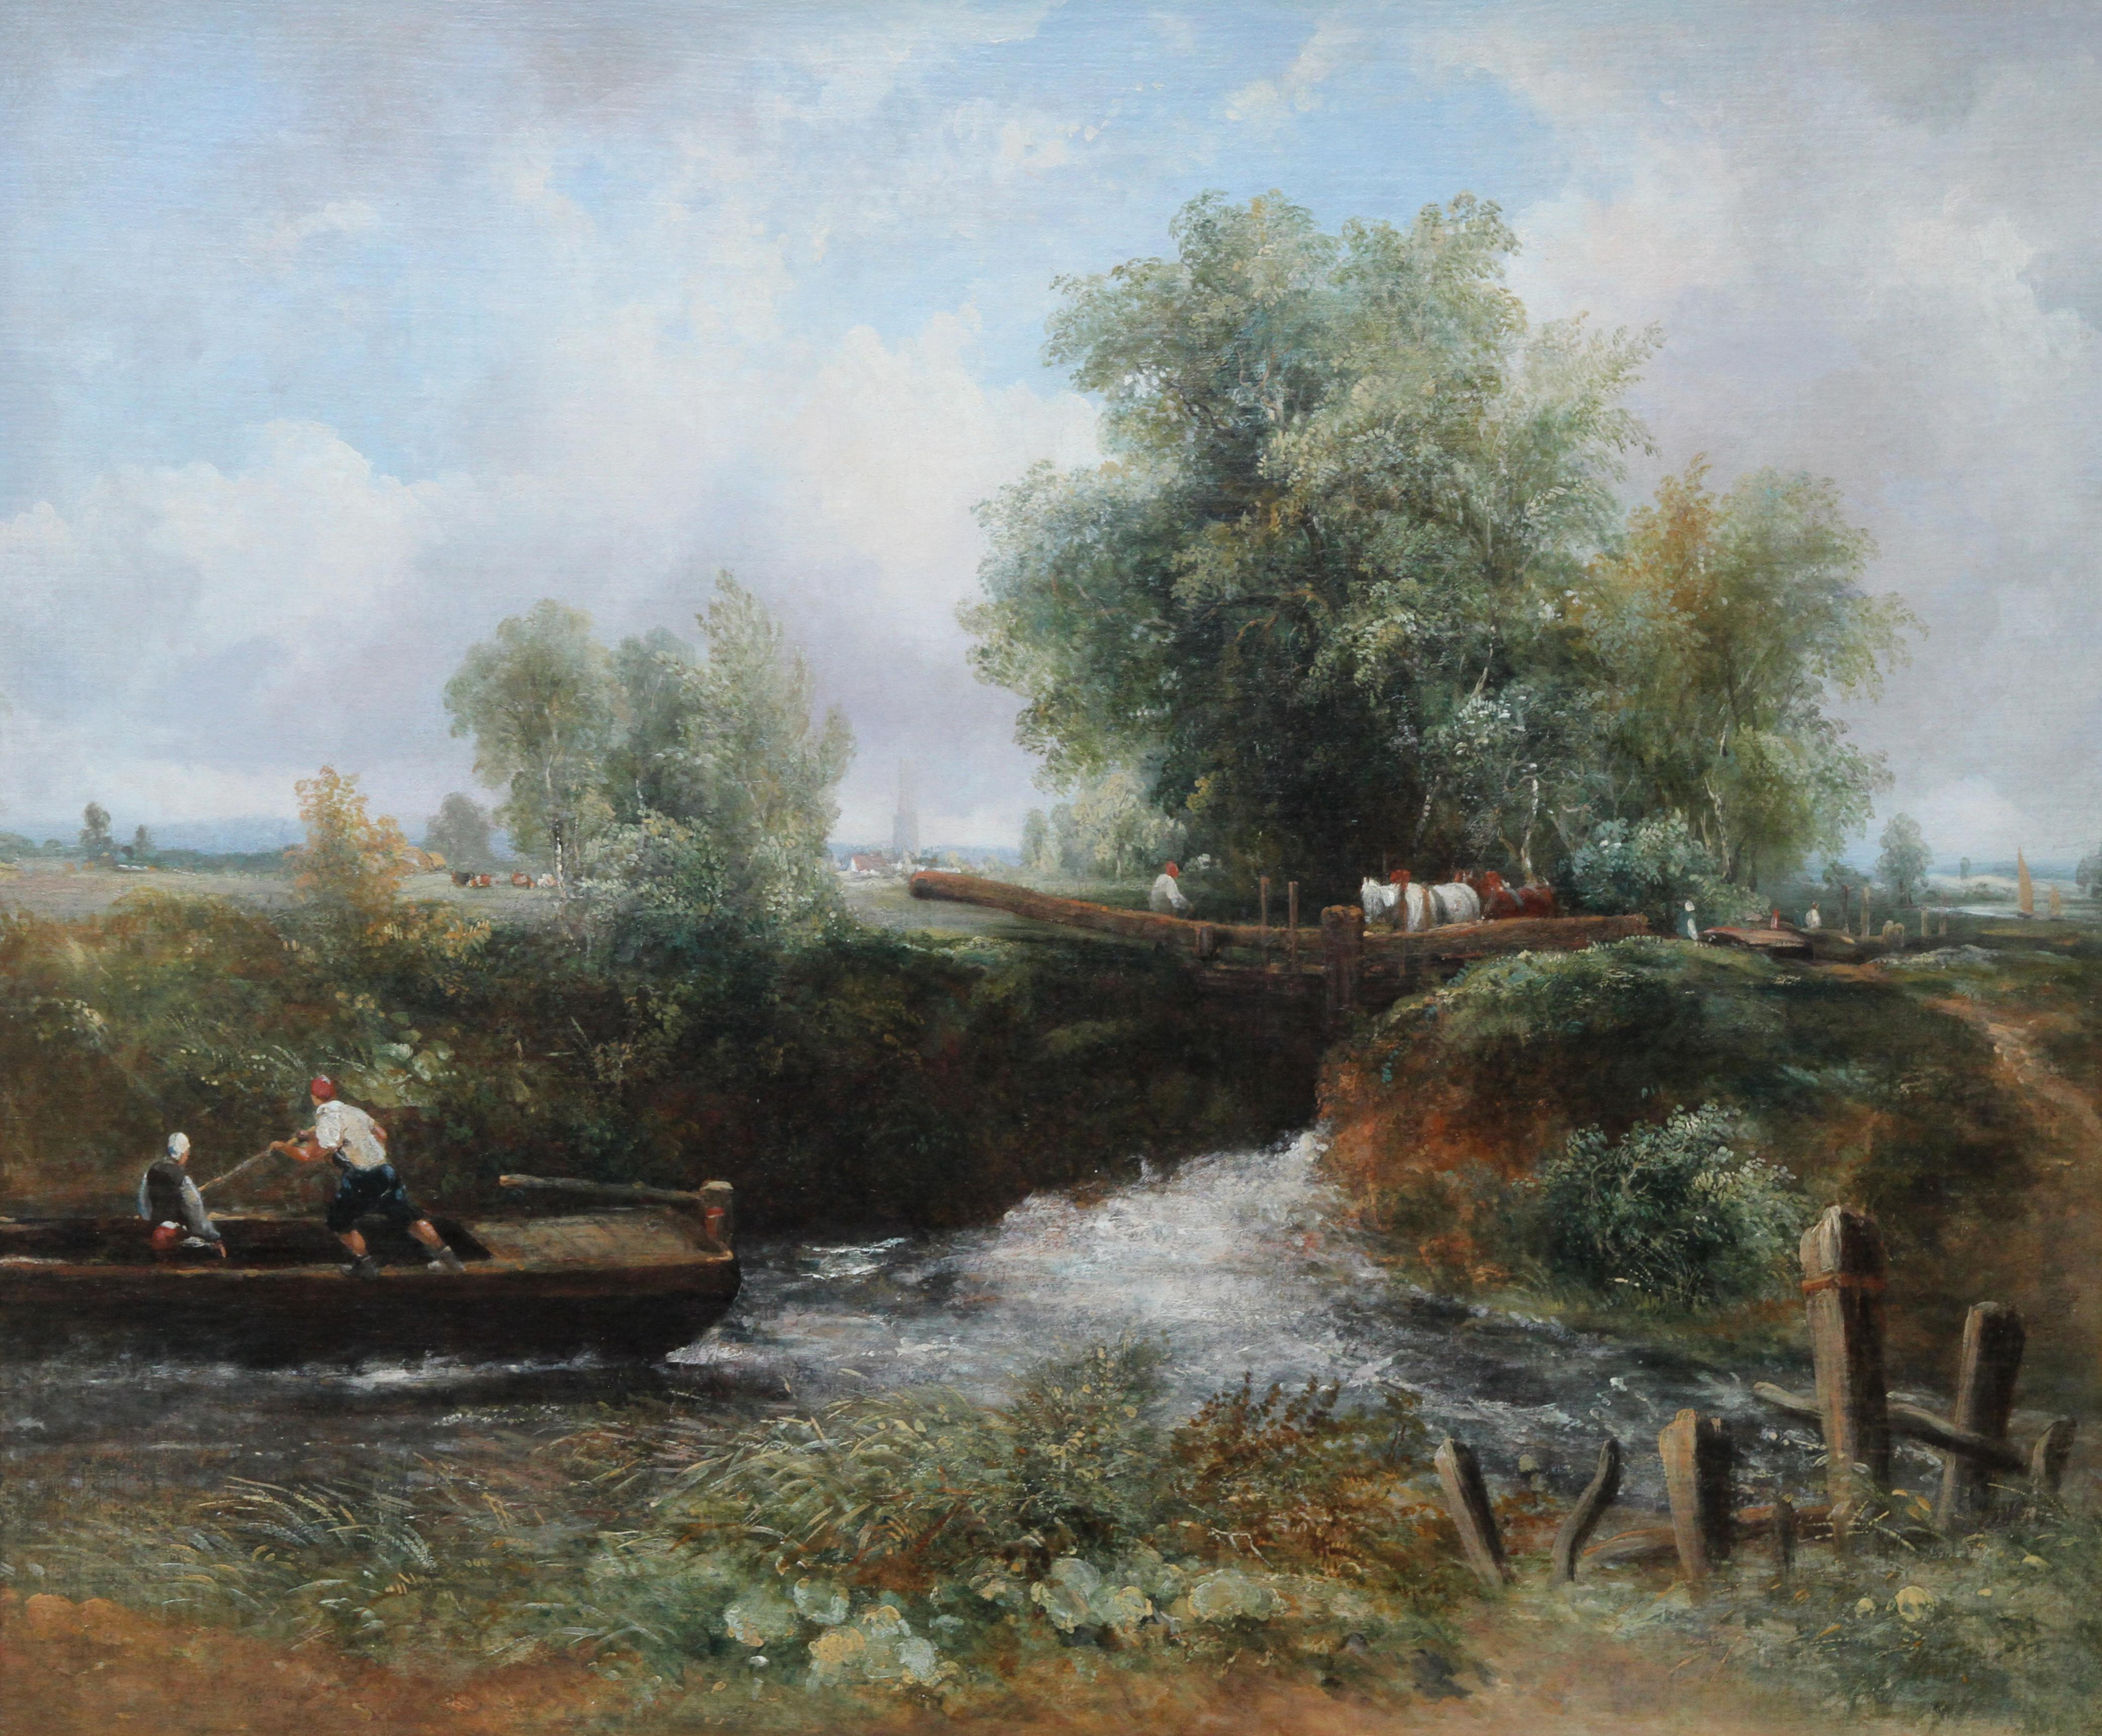 Lock on the Stour - British 19th century art river landscape oil painting For Sale 6